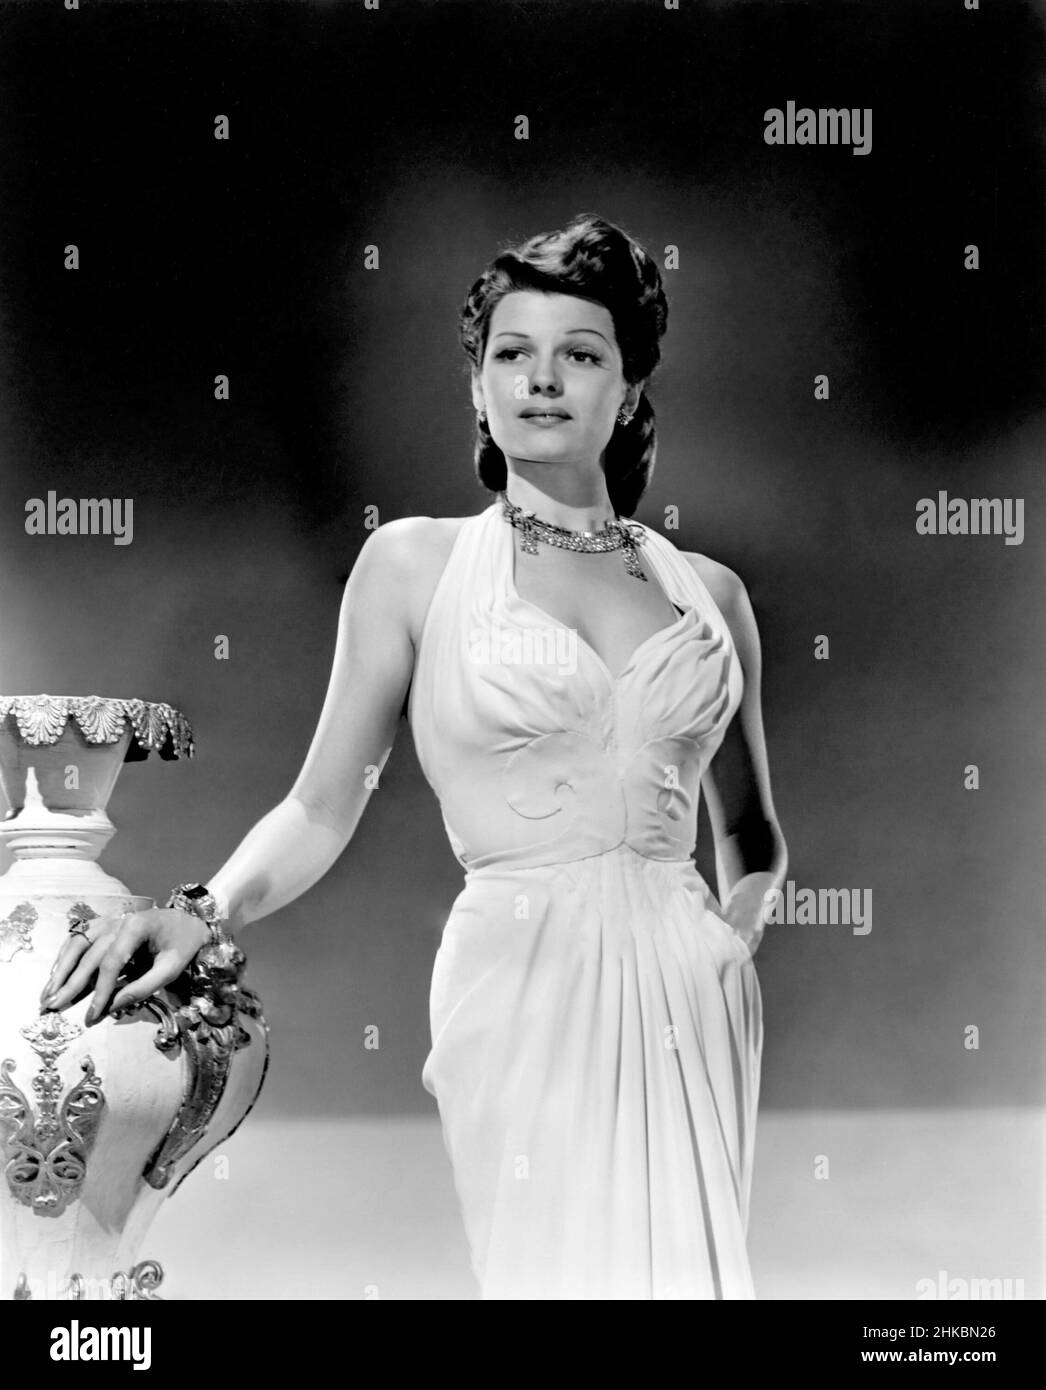 RITA HAYWORTH in BLOOD AND SAND (1941), directed by ROUBEN MAMOULIAN. Credit: 20TH CENTURY FOX / Album Stock Photo